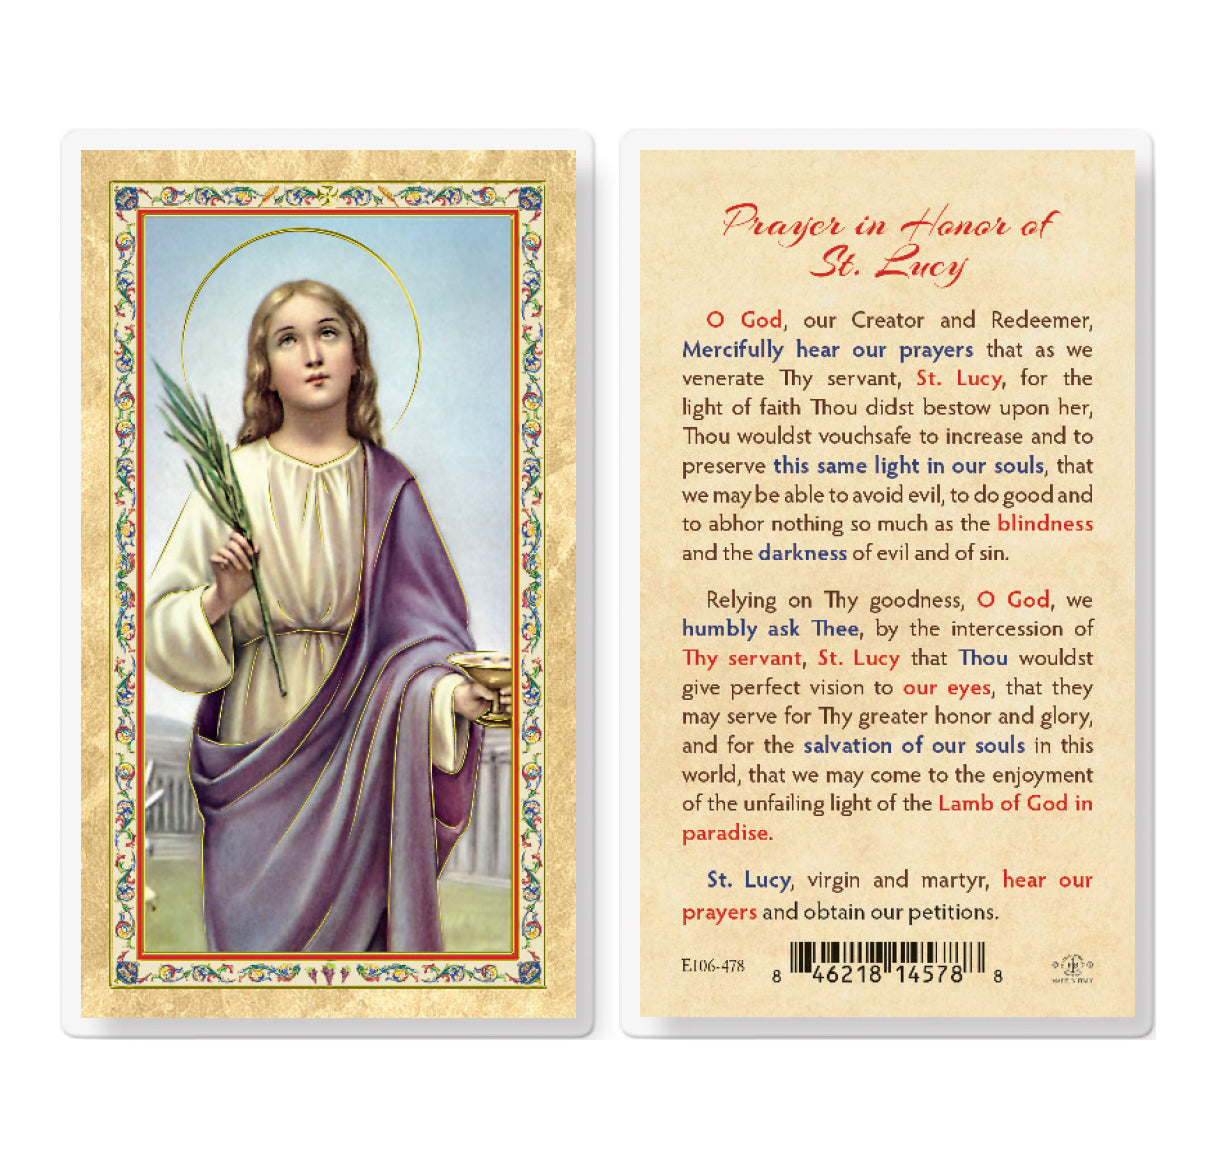 Prayer in Honor of St. Lucy Gold-Stamped Laminated Catholic Prayer Holy Card with Prayer on Back, Pack of 25